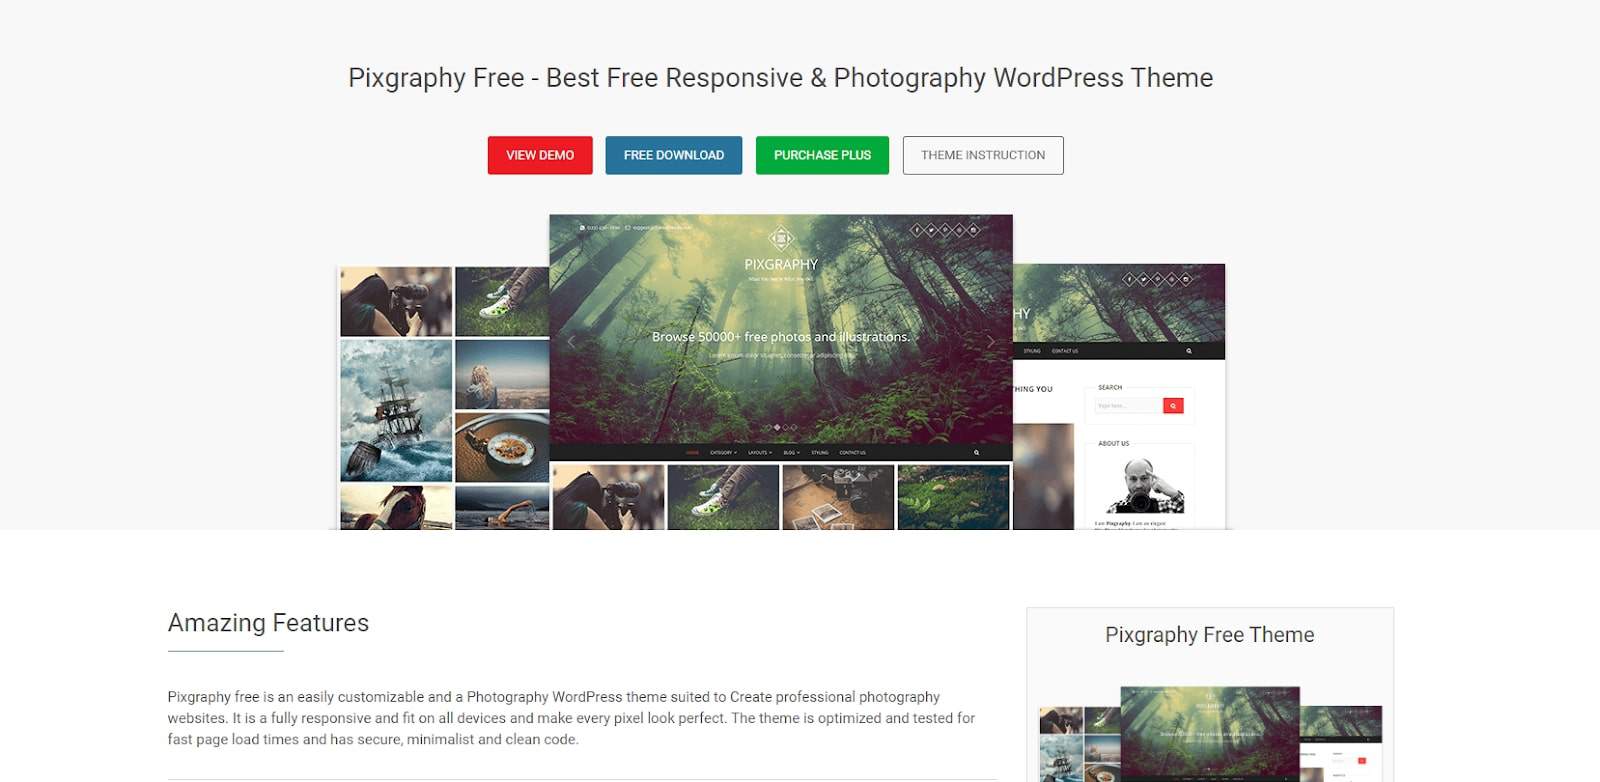 Pixgraphy is a great theme for photography freelancers